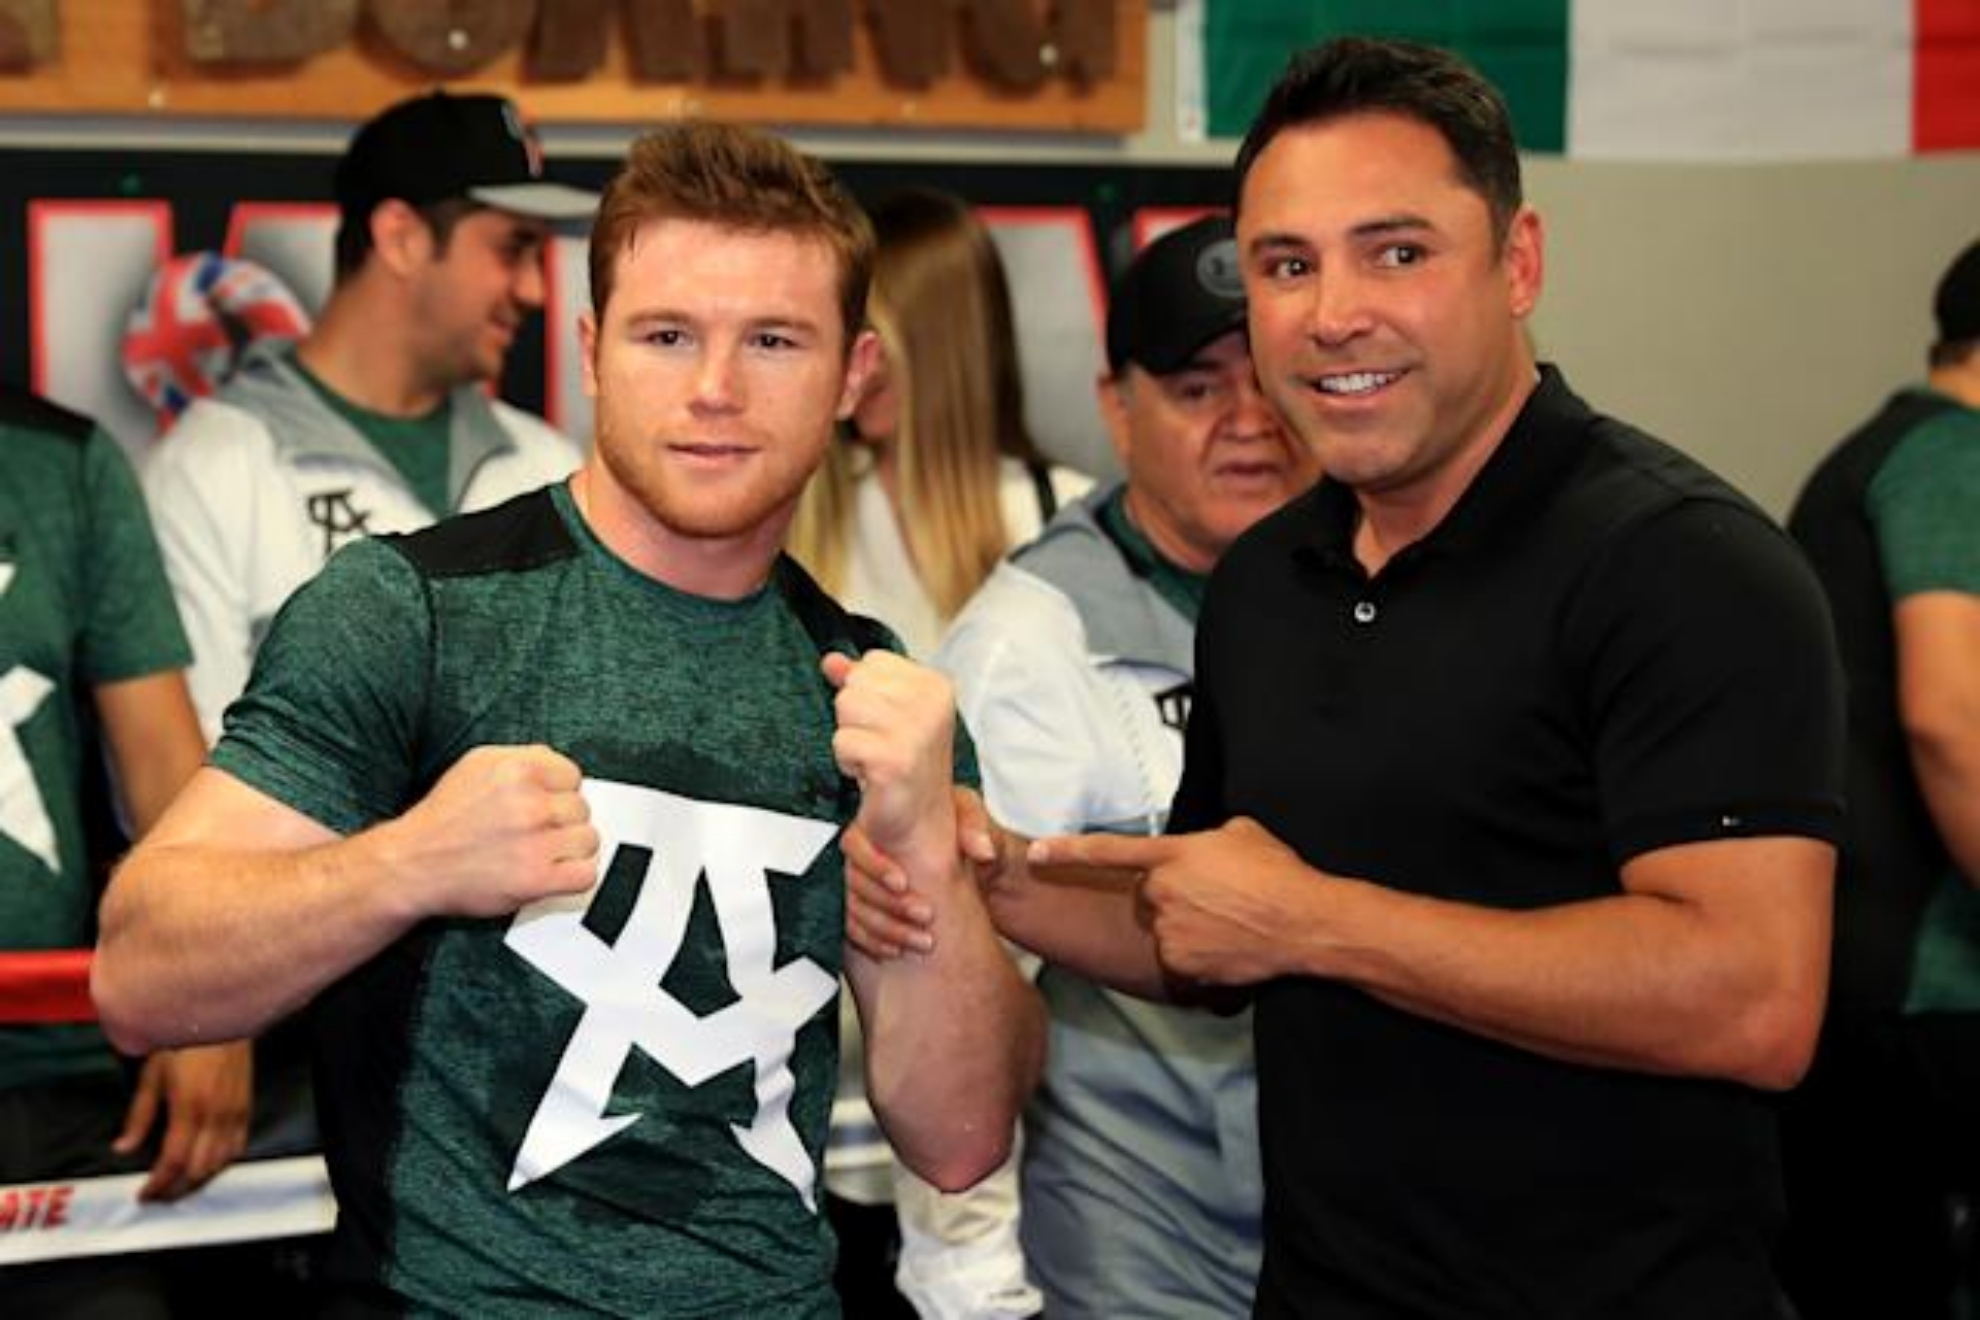 Canelo Alvarez is at the end of his career after the Ryder fight according to Oscar de la Hoya